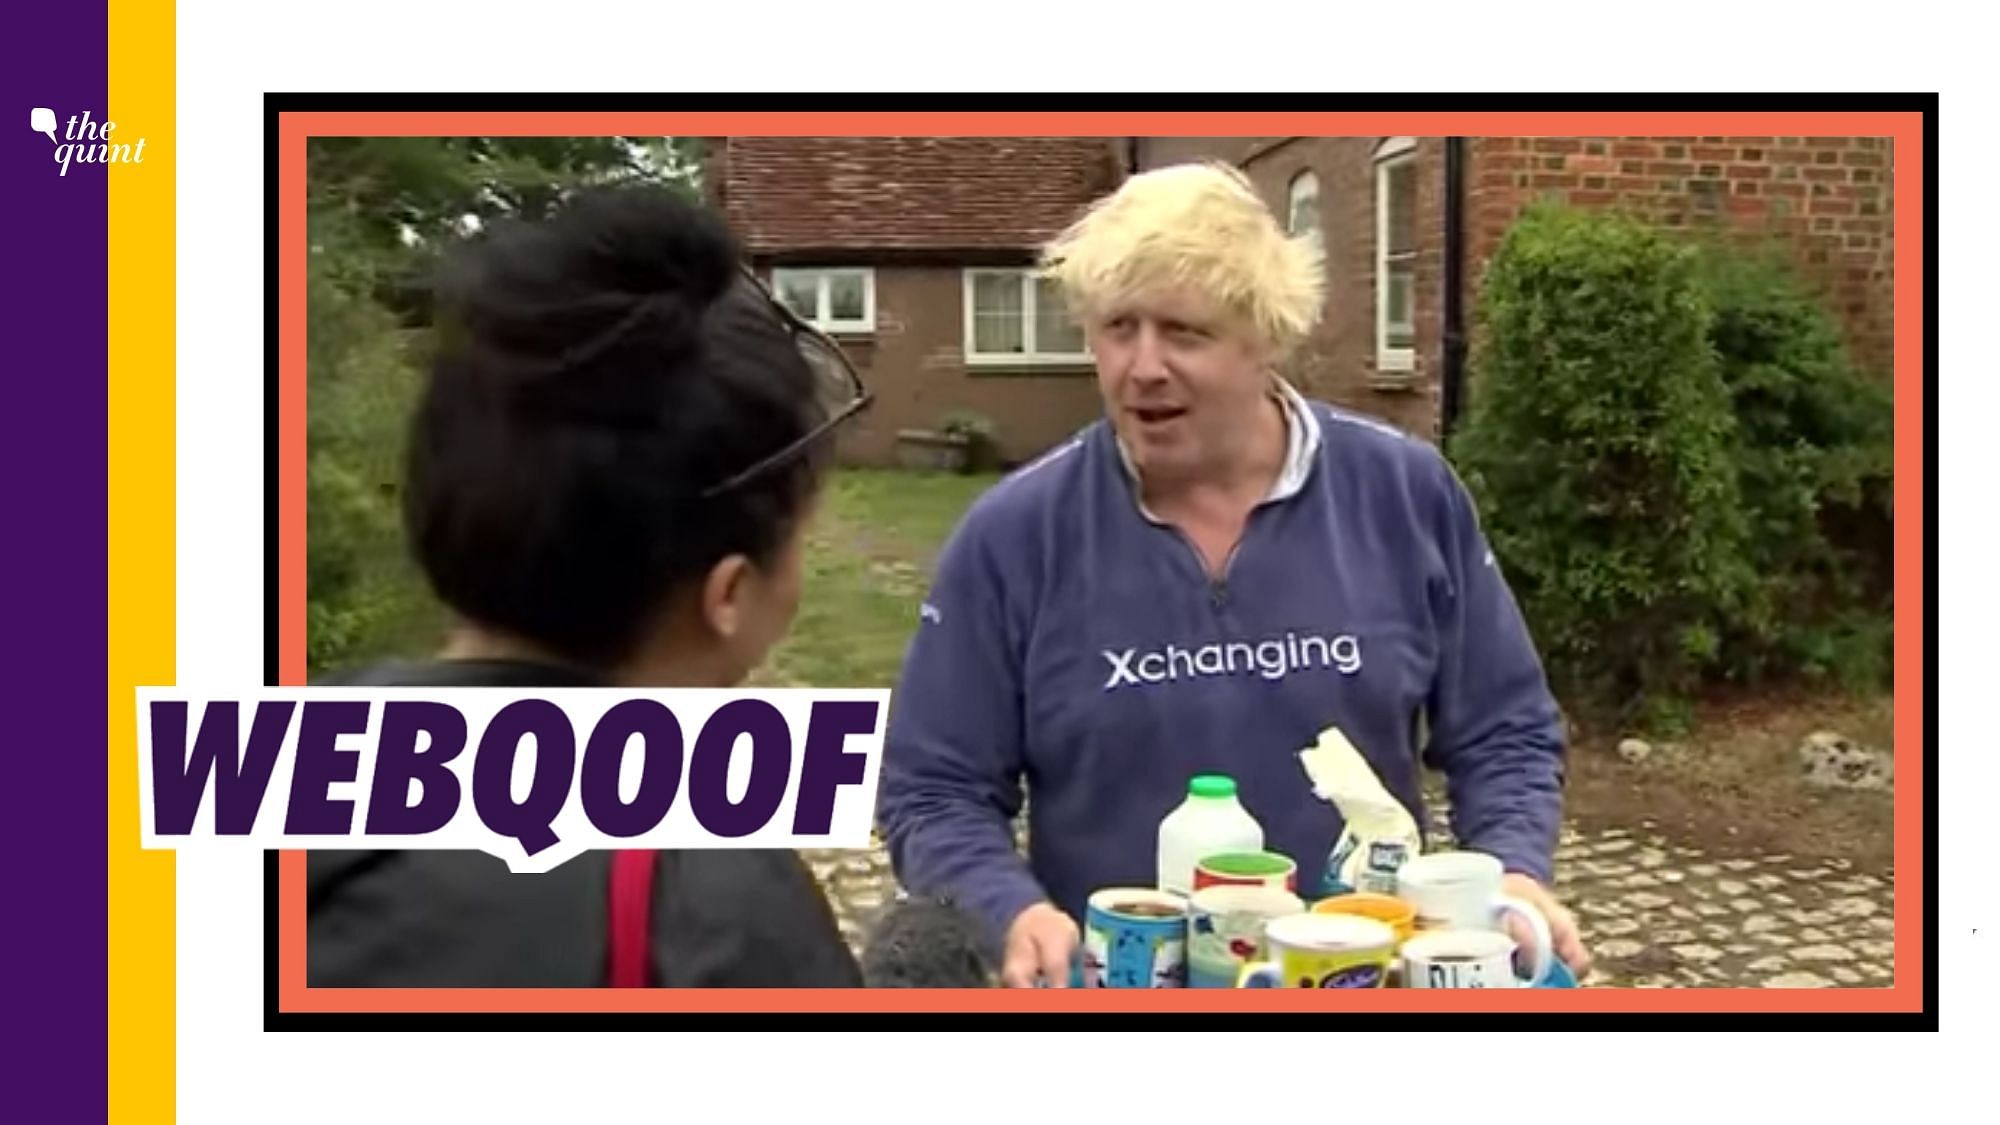 A viral video falsely claimed that UK PM Boris Johnson offered tea to journalists after recovering from coronavirus.